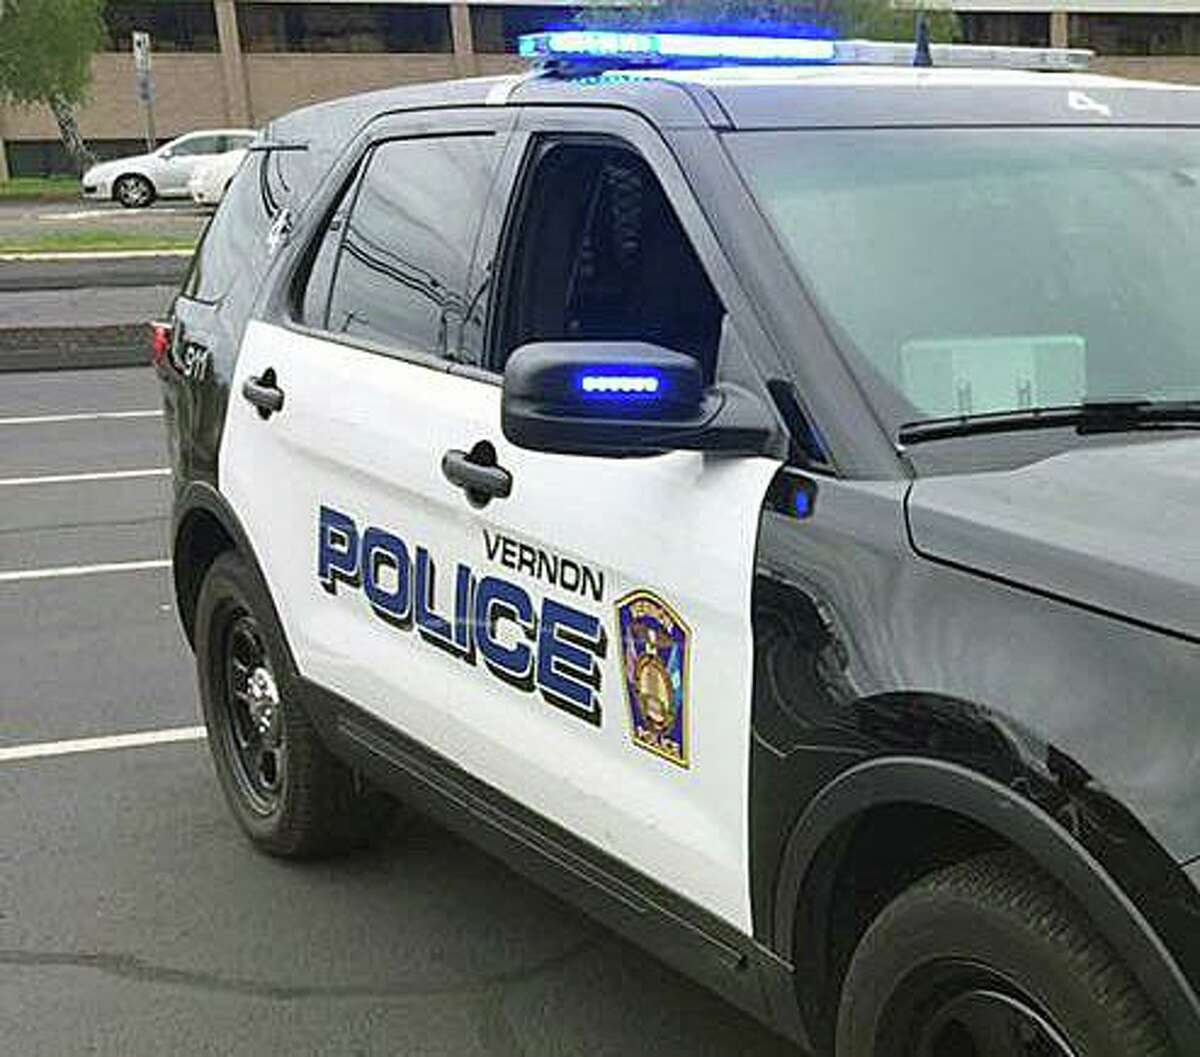 A Vernon Police Department vehicle. Angelo Alleano, 49, of Vernon pleaded guilty to four counts of first-degree sexual assault Friday. He attacked women in Manchester and Vernon.